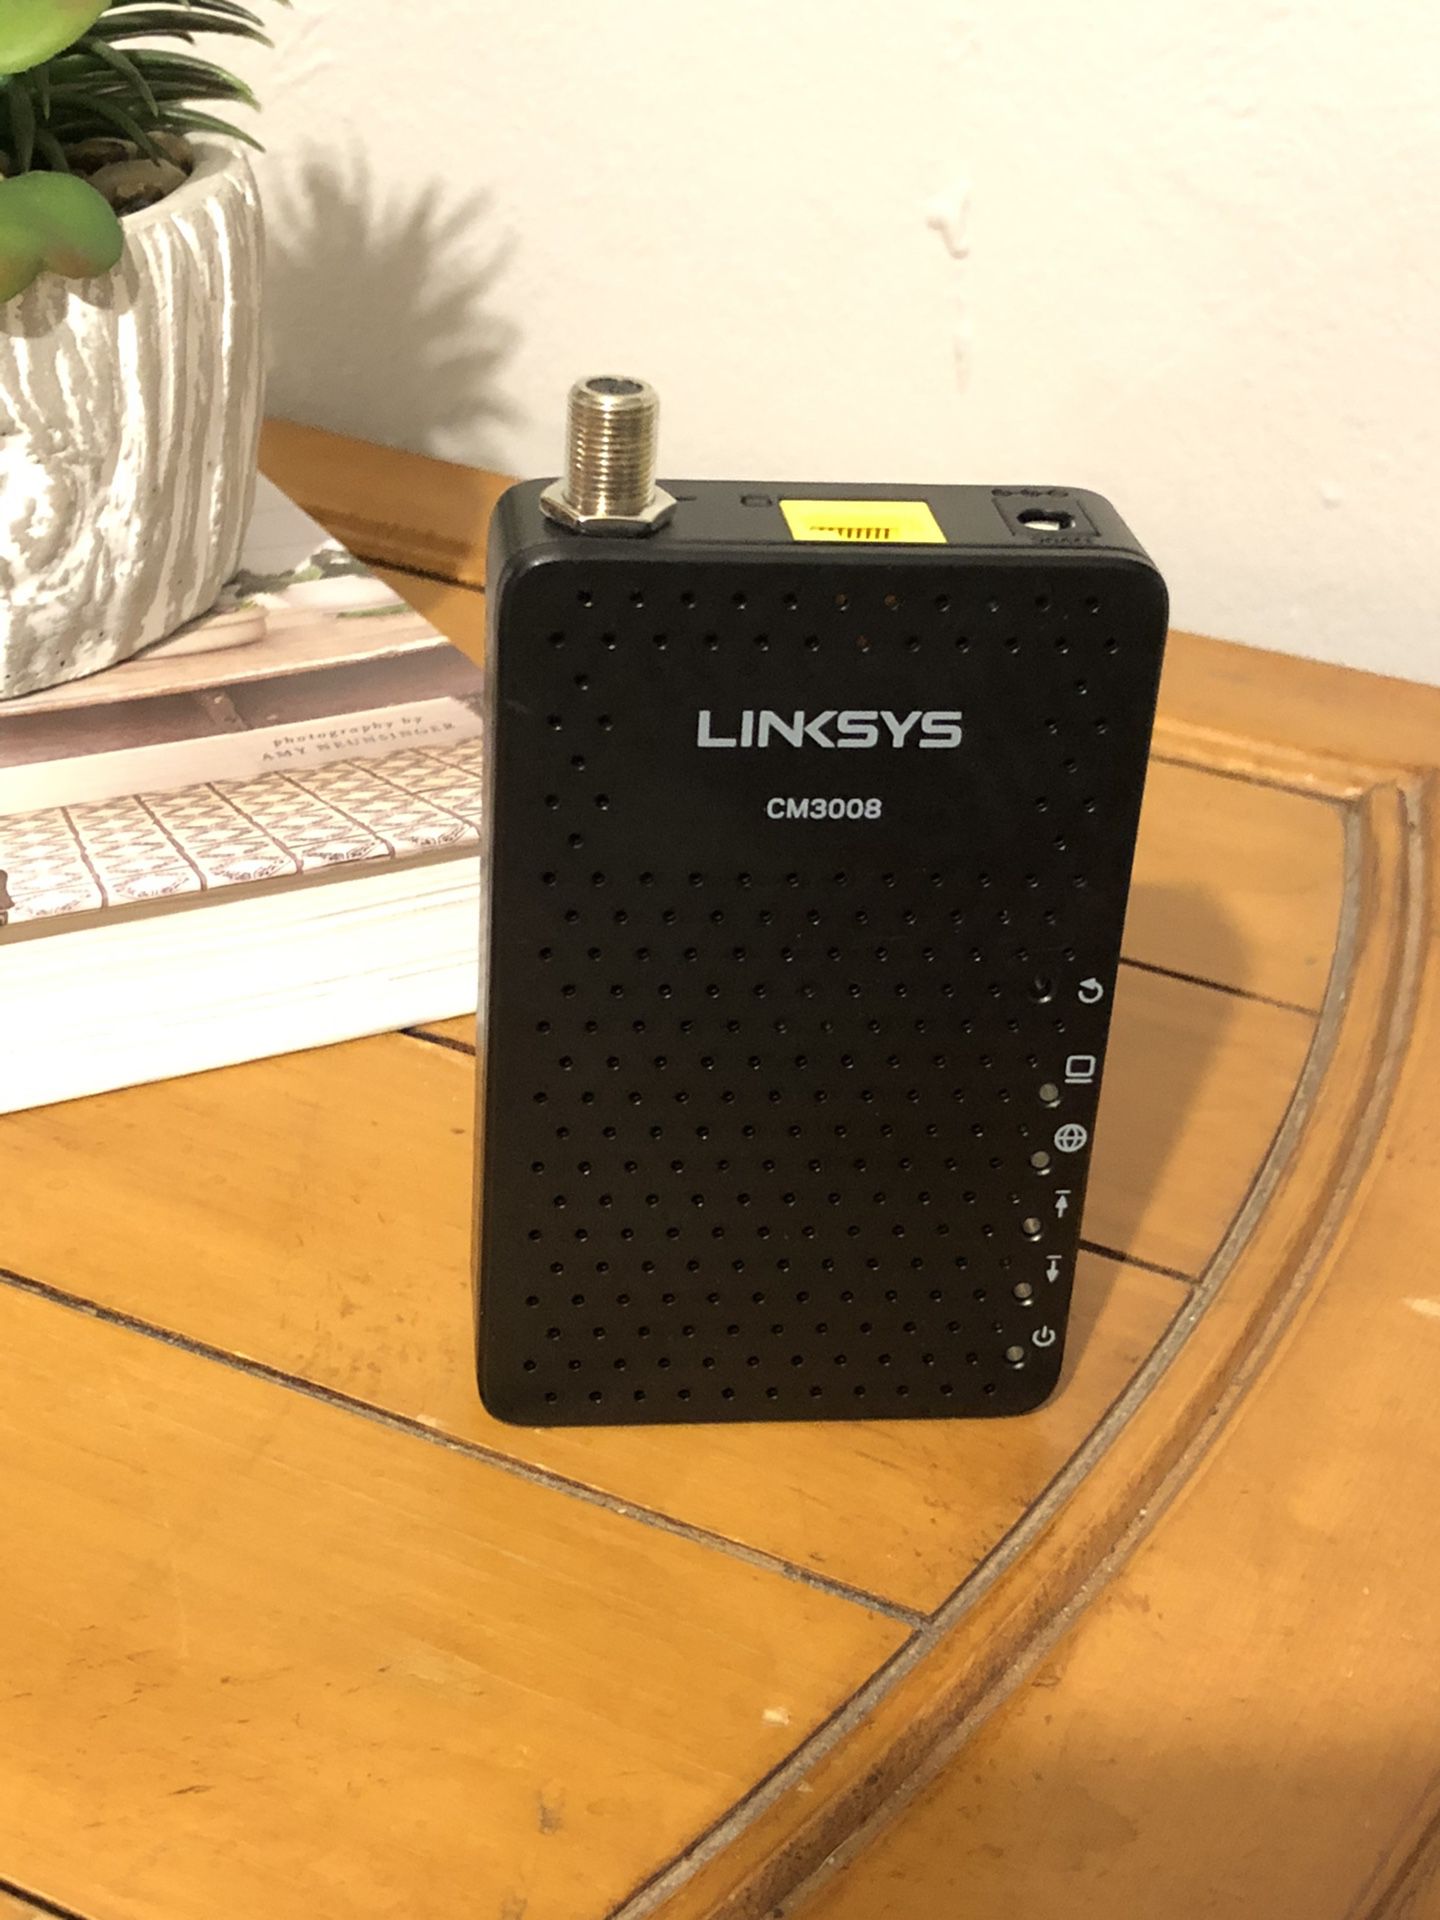 Linksys CM3008 Cable Modem for Comcast Cox Time Warner with speeds just under 400 Mbps